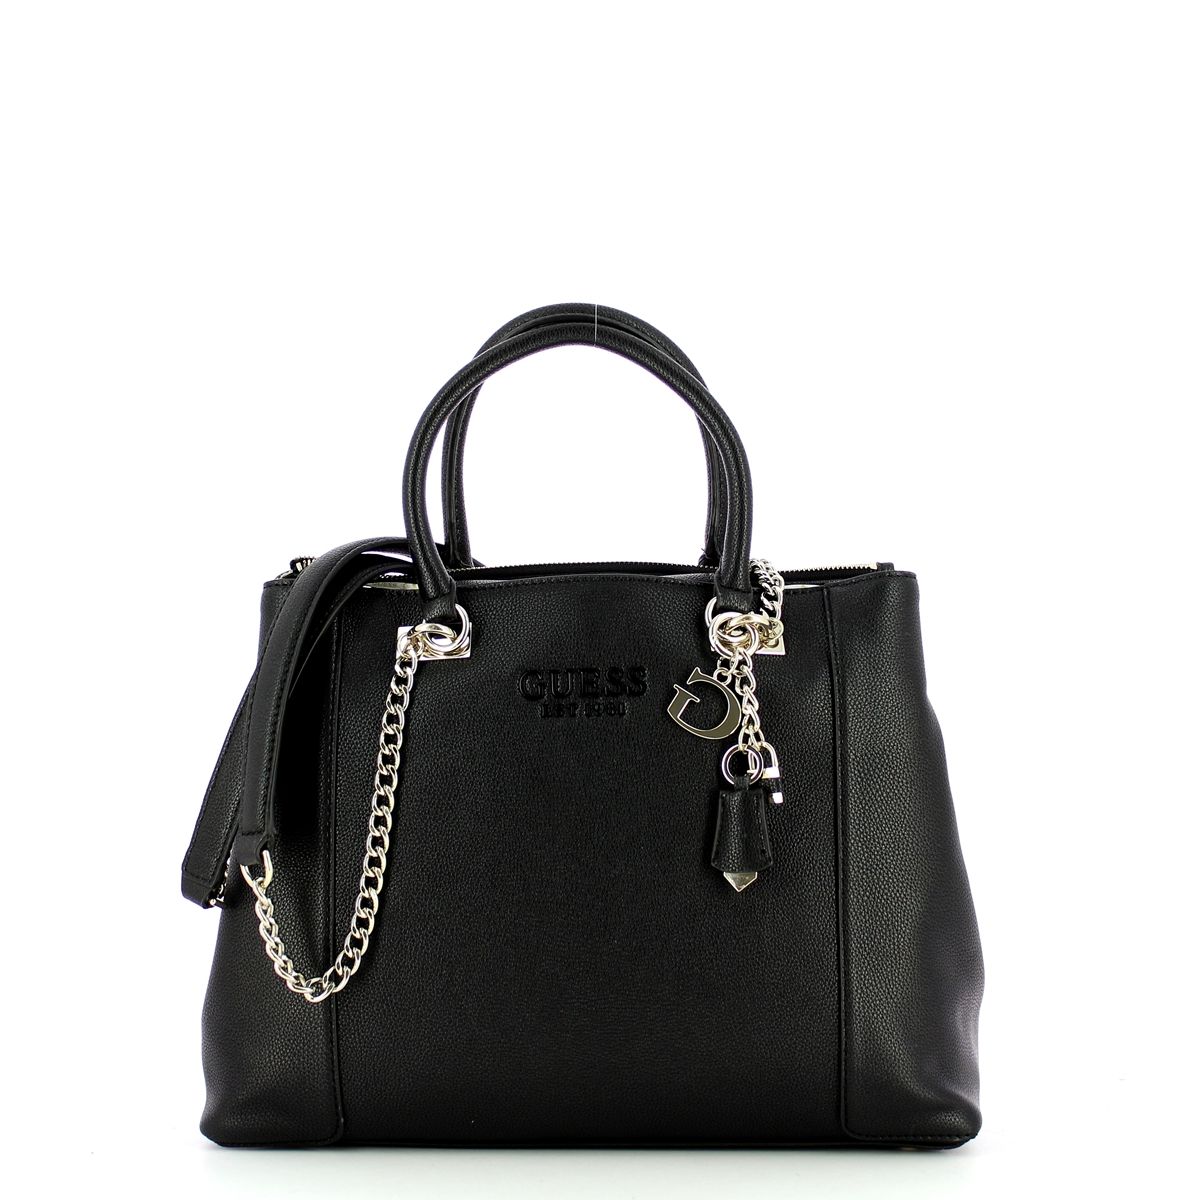 Holly Society Luxe Carryall Guess, faux leather handbag with multiple compartments, and two sets of handles.